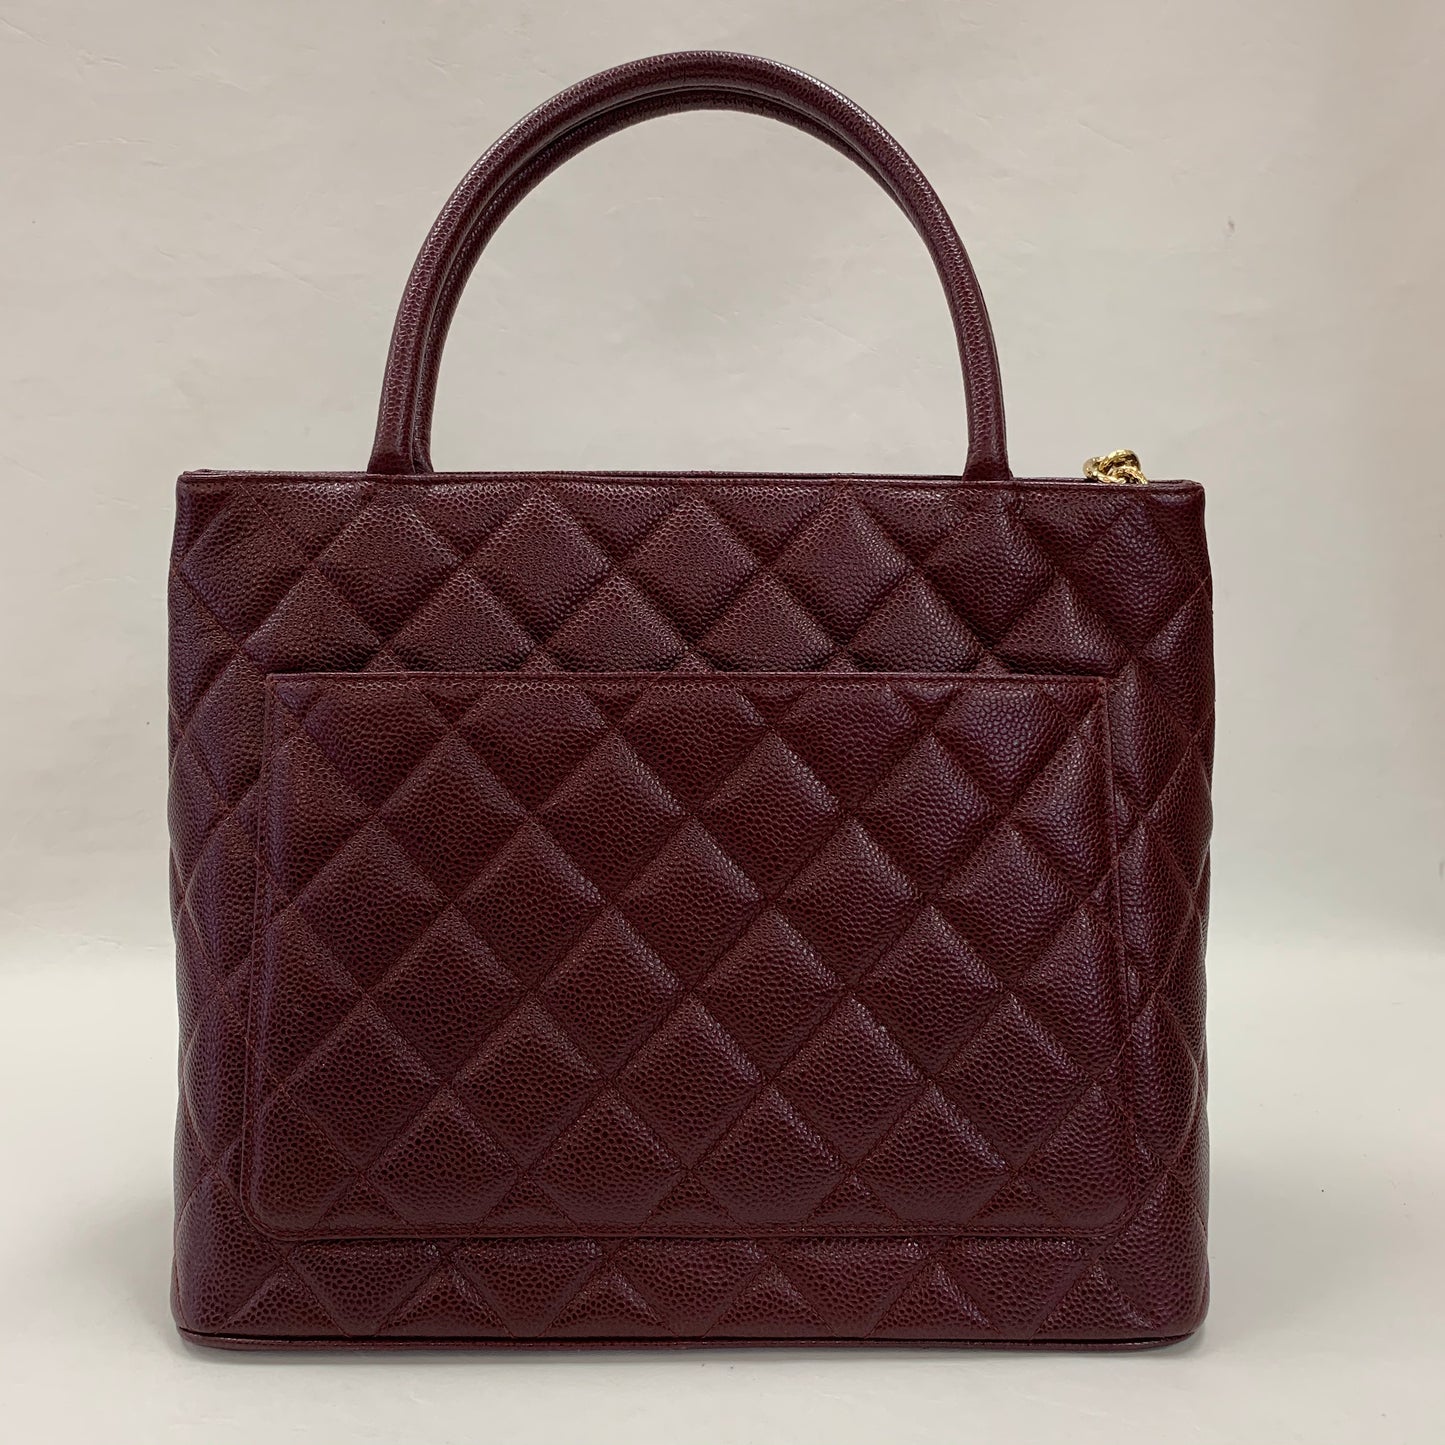 Authentic Chanel Burgundy Medallion Tote